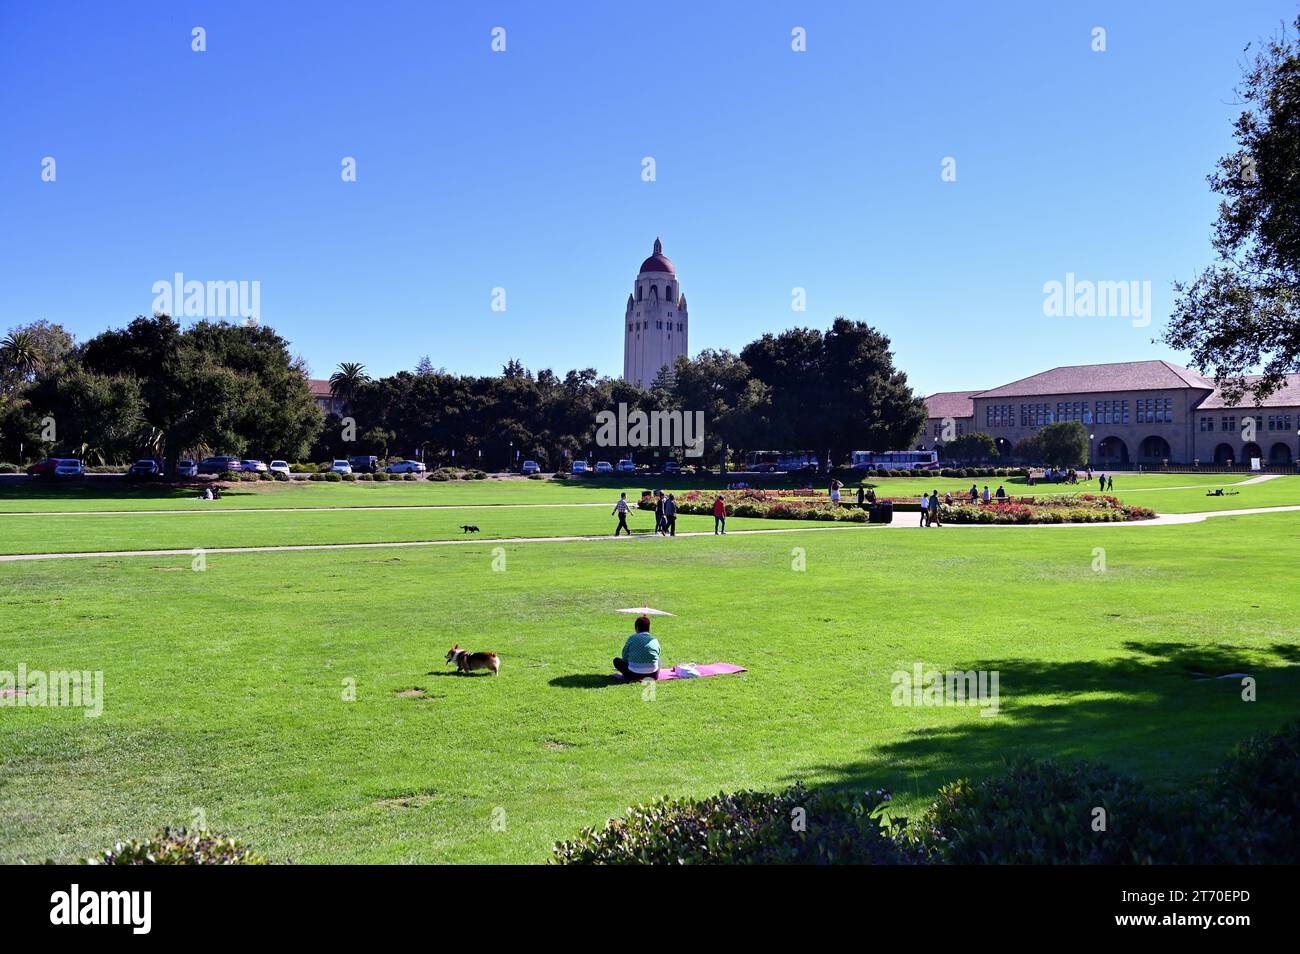 Stanford, California, USA. The grassy Oval on the campus of Stanford University. Stock Photo